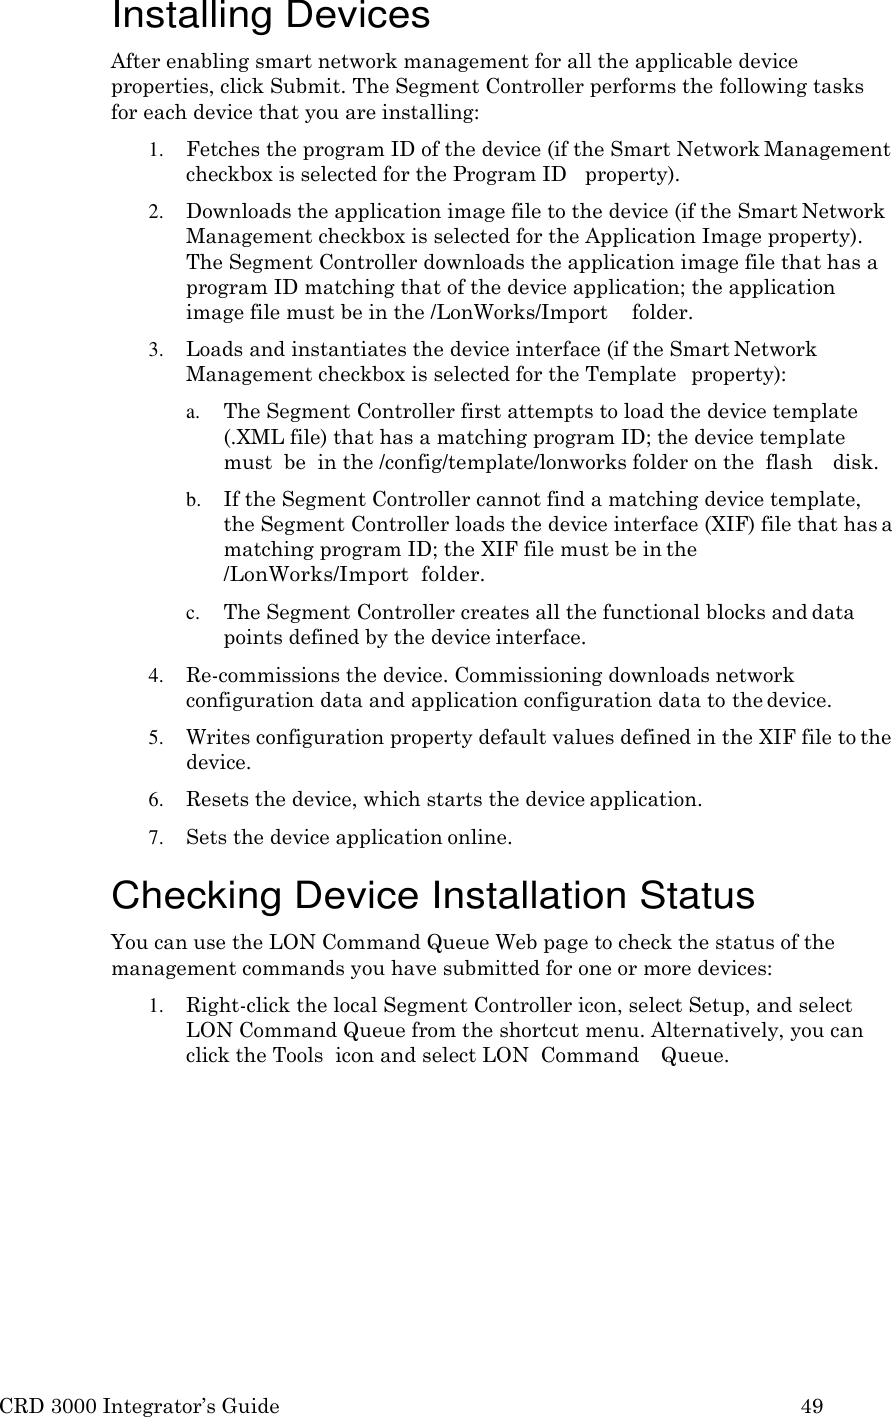 CRD 3000 Integrator’s Guide 49  Installing Devices After enabling smart network management for all the applicable device properties, click Submit. The Segment Controller performs the following tasks for each device that you are installing: 1. Fetches the program ID of the device (if the Smart Network Management checkbox is selected for the Program ID   property). 2. Downloads the application image file to the device (if the Smart Network Management checkbox is selected for the Application Image property). The Segment Controller downloads the application image file that has a program ID matching that of the device application; the application image file must be in the /LonWorks/Import    folder. 3. Loads and instantiates the device interface (if the Smart Network Management checkbox is selected for the Template   property): a. The Segment Controller first attempts to load the device template (.XML file) that has a matching program ID; the device template must  be  in the /config/template/lonworks folder on the  flash   disk. b. If the Segment Controller cannot find a matching device template, the Segment Controller loads the device interface (XIF) file that has a matching program ID; the XIF file must be in the /LonWorks/Import  folder. c. The Segment Controller creates all the functional blocks and data points defined by the device interface. 4. Re-commissions the device. Commissioning downloads network configuration data and application configuration data to the device. 5. Writes configuration property default values defined in the XIF file to the device. 6. Resets the device, which starts the device application. 7. Sets the device application online.  Checking Device Installation Status You can use the LON Command Queue Web page to check the status of the management commands you have submitted for one or more devices: 1. Right-click the local Segment Controller icon, select Setup, and select LON Command Queue from the shortcut menu. Alternatively, you can click the Tools  icon and select LON  Command    Queue. 